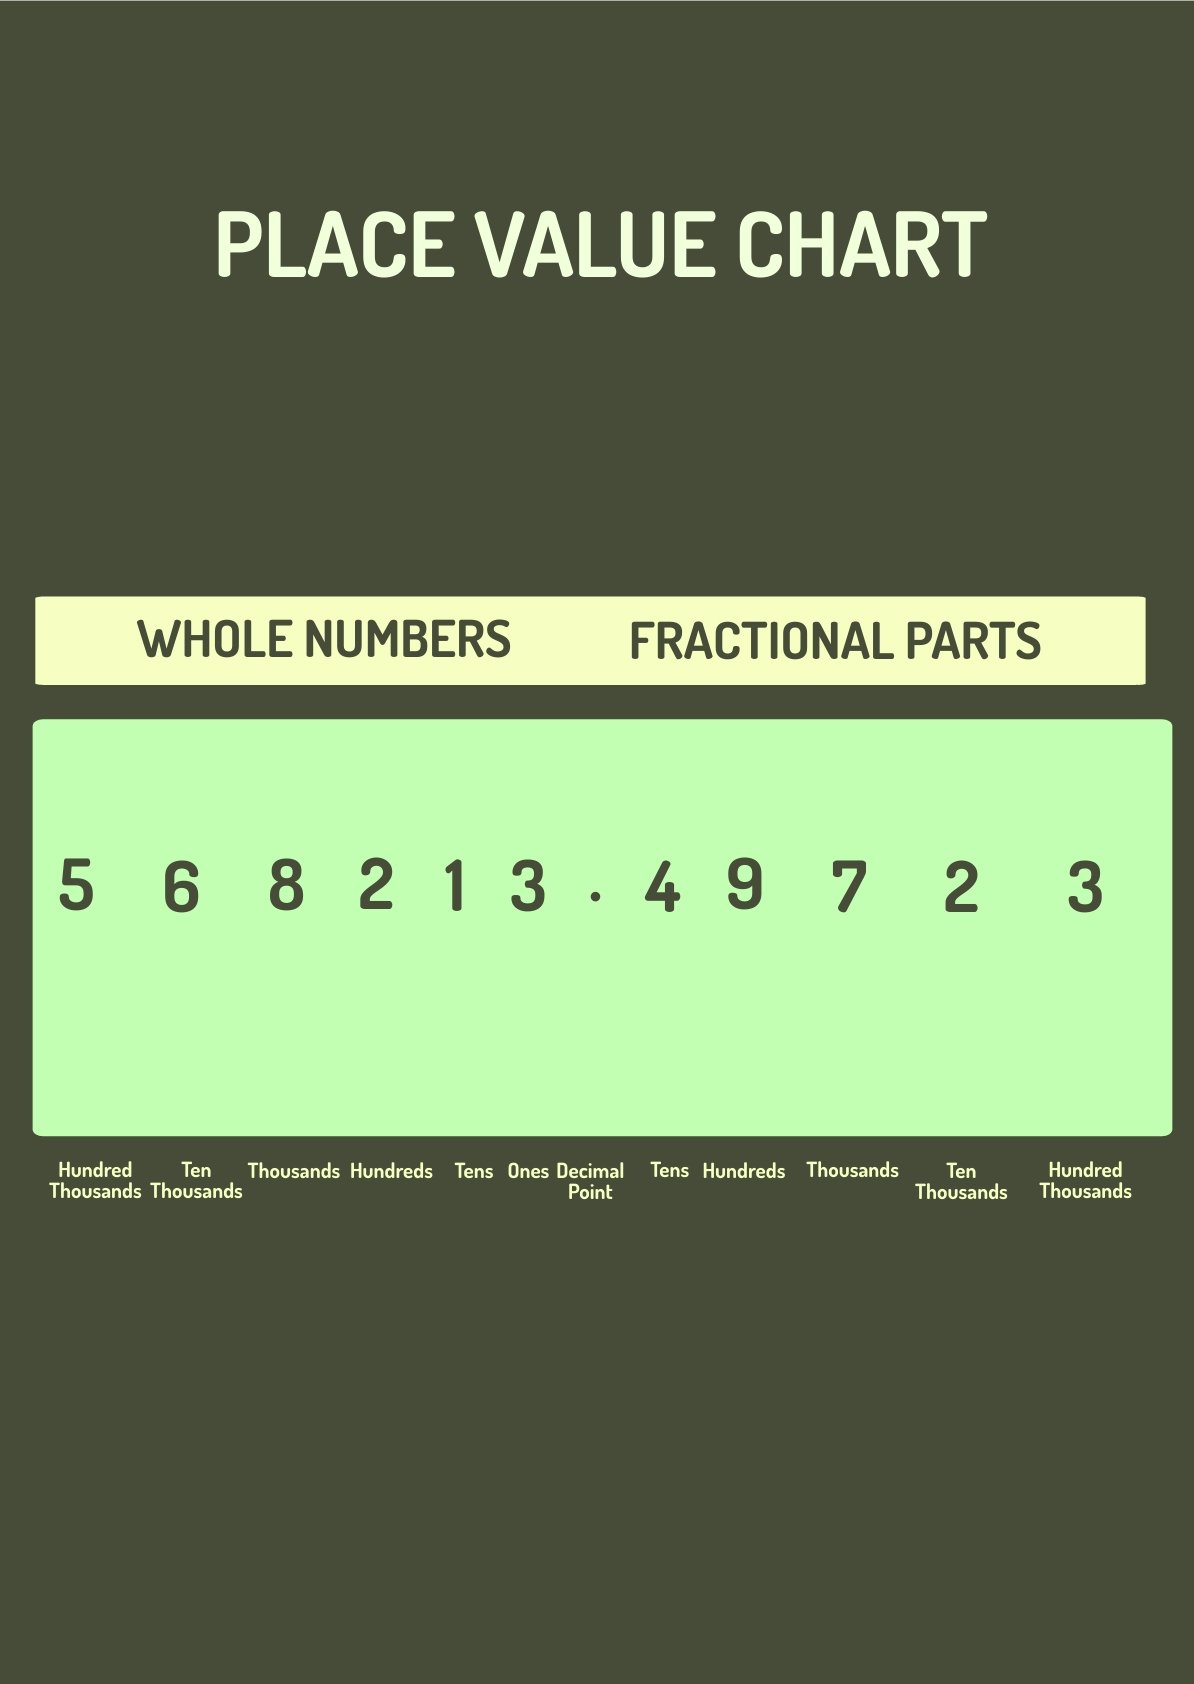 Free Place Value Chart in PDF, Illustrator